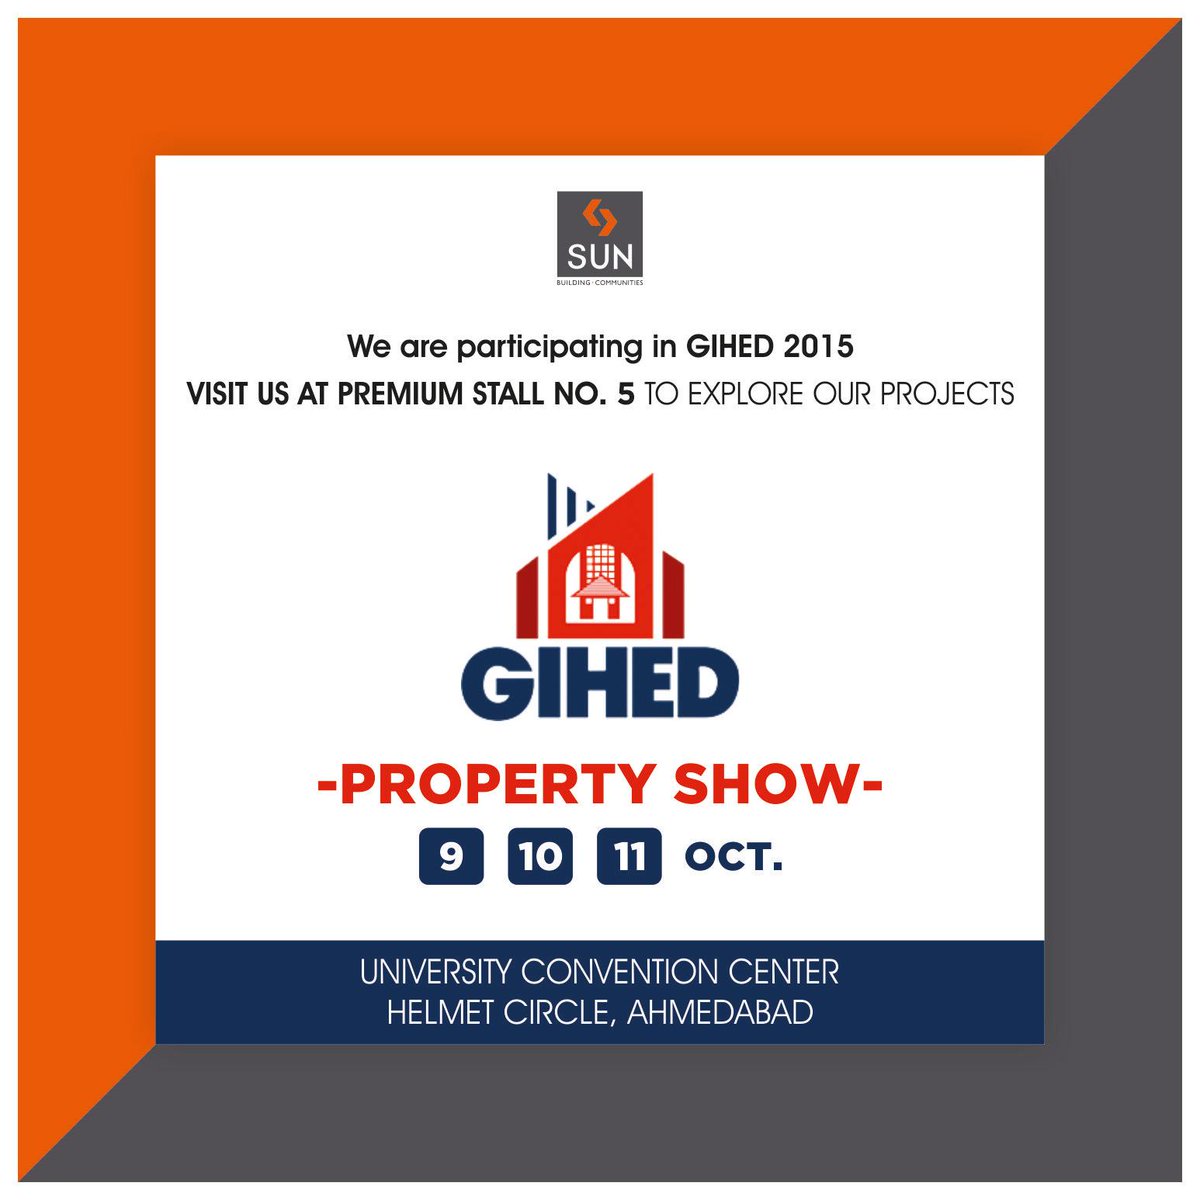 Come visit us at Premium stall no. 5 at The Largest Property Show of Ahmedabad  - #GIHED Property show! http://t.co/AZJxOr1khH